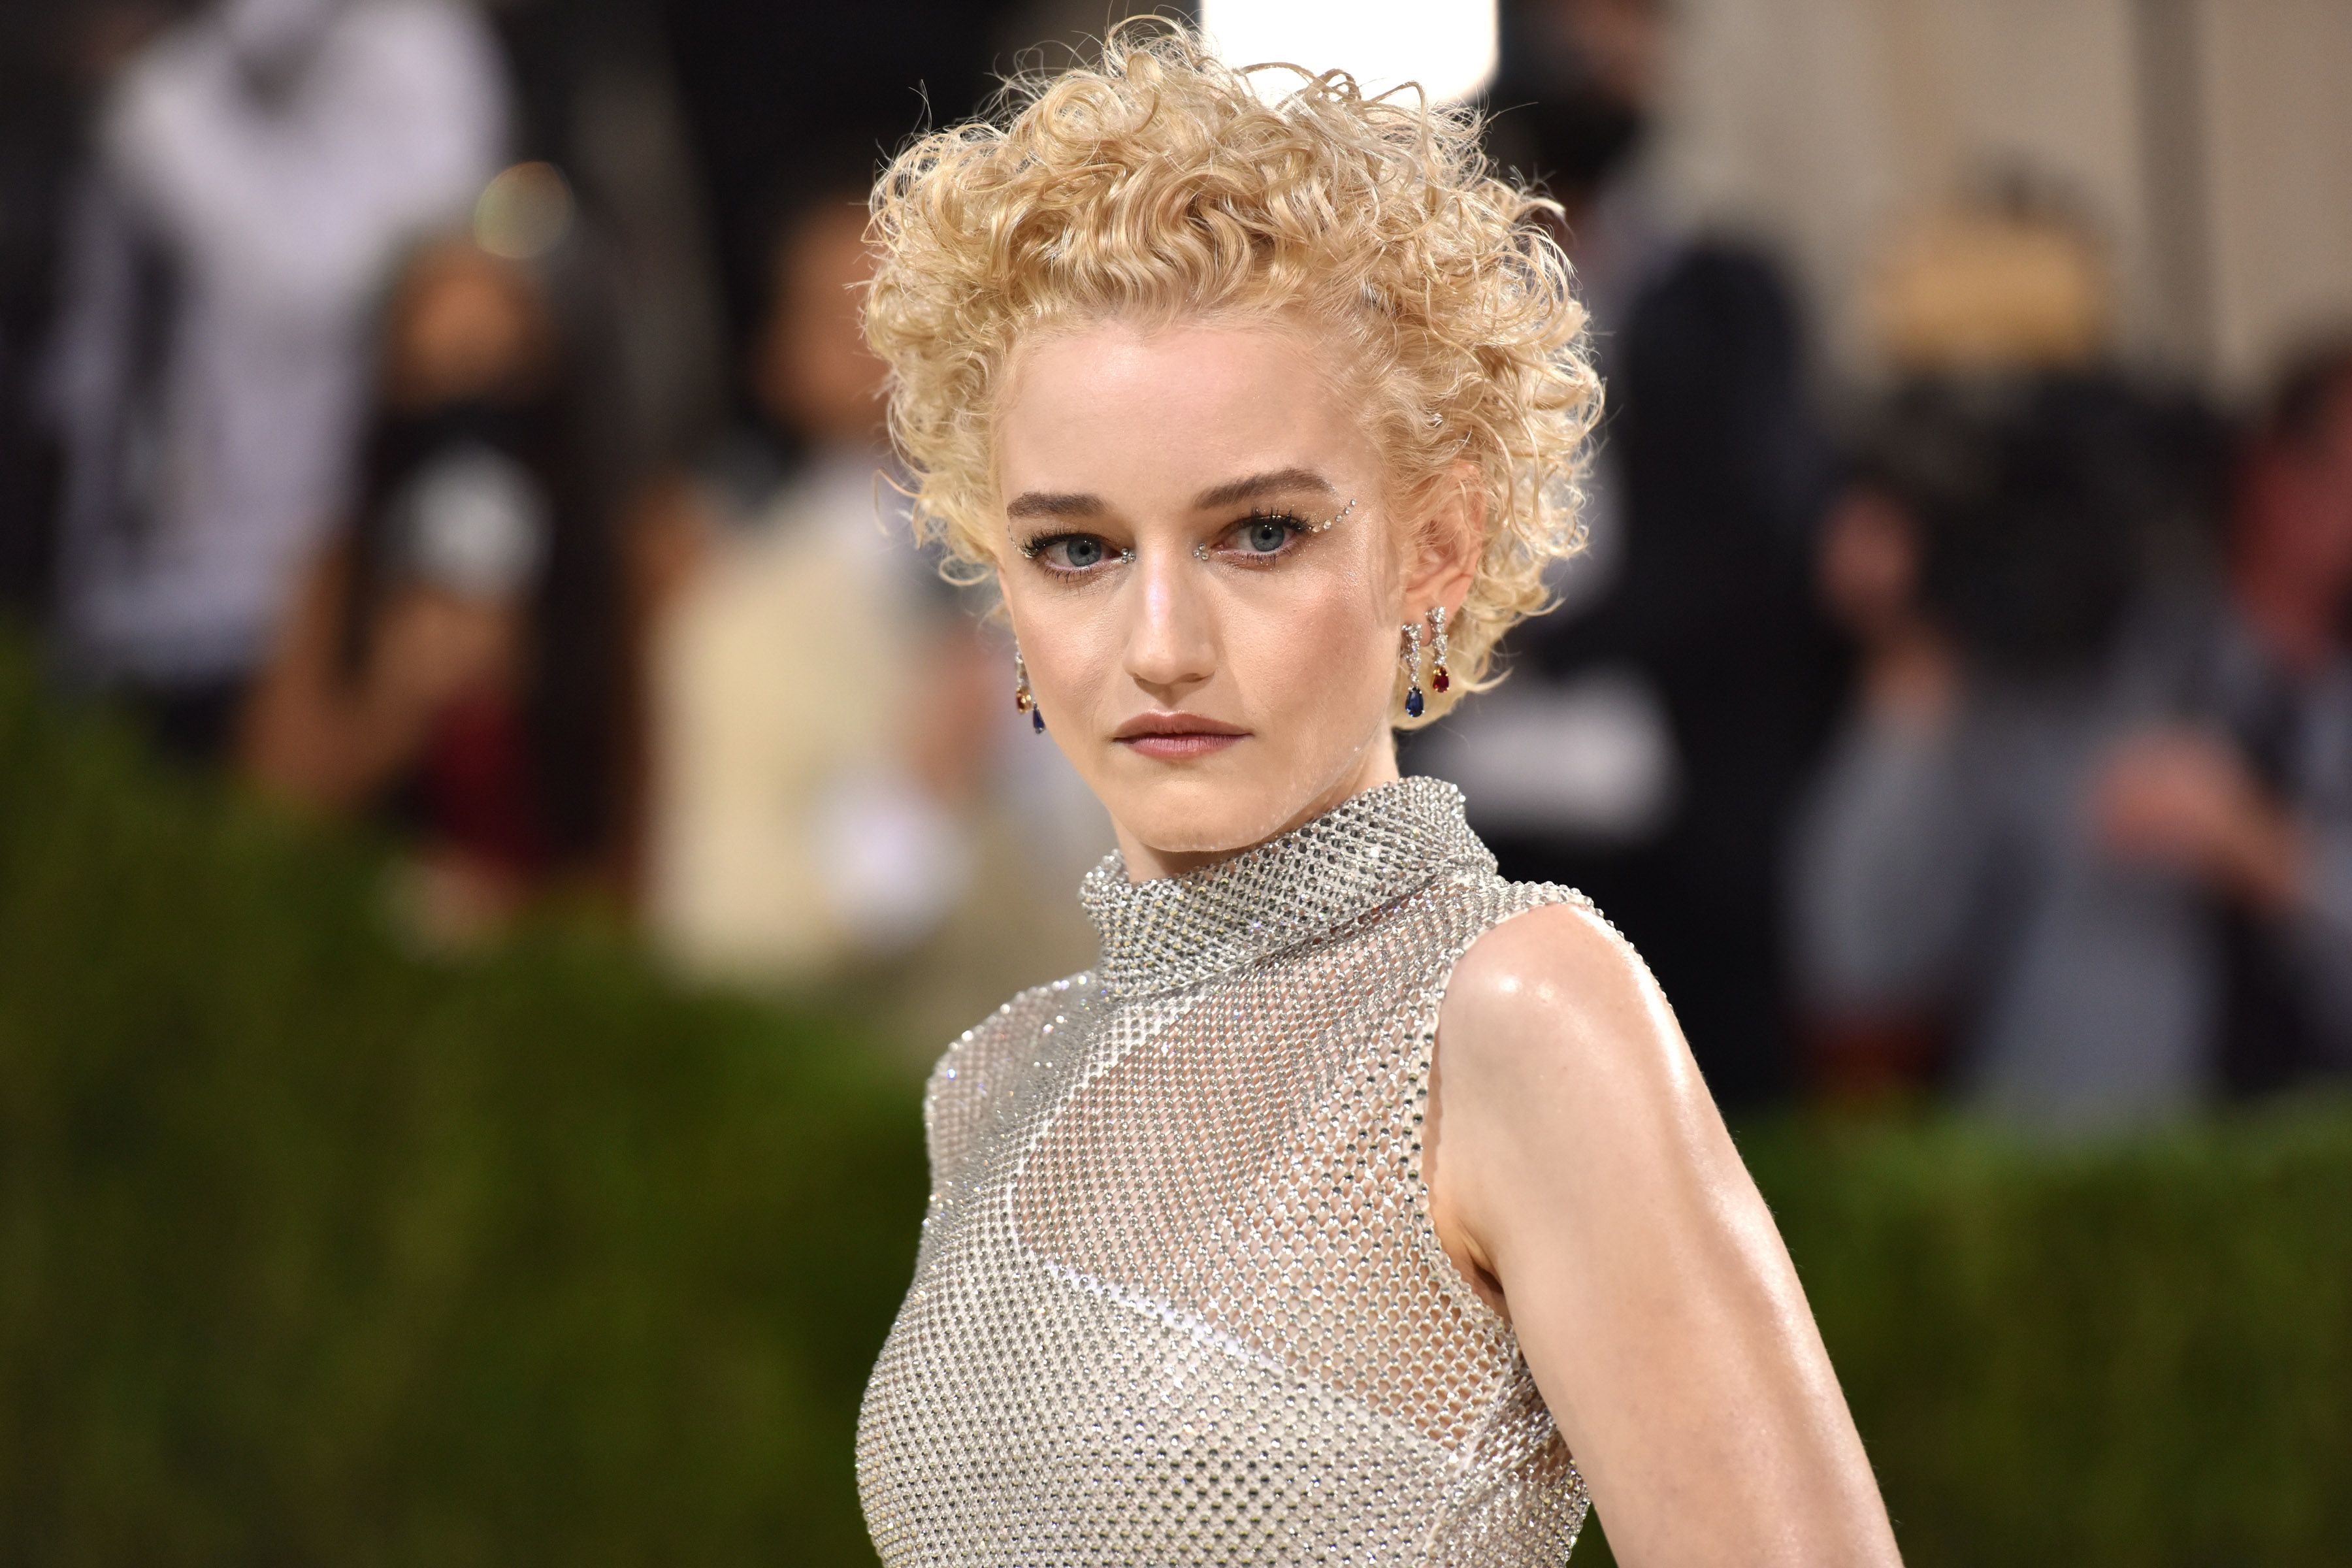 kaldenavn Pirat Gamle tider Inventing Anna's Julia Garner Discusses Hollywood Auditions And Not Being  The Girl Next Door